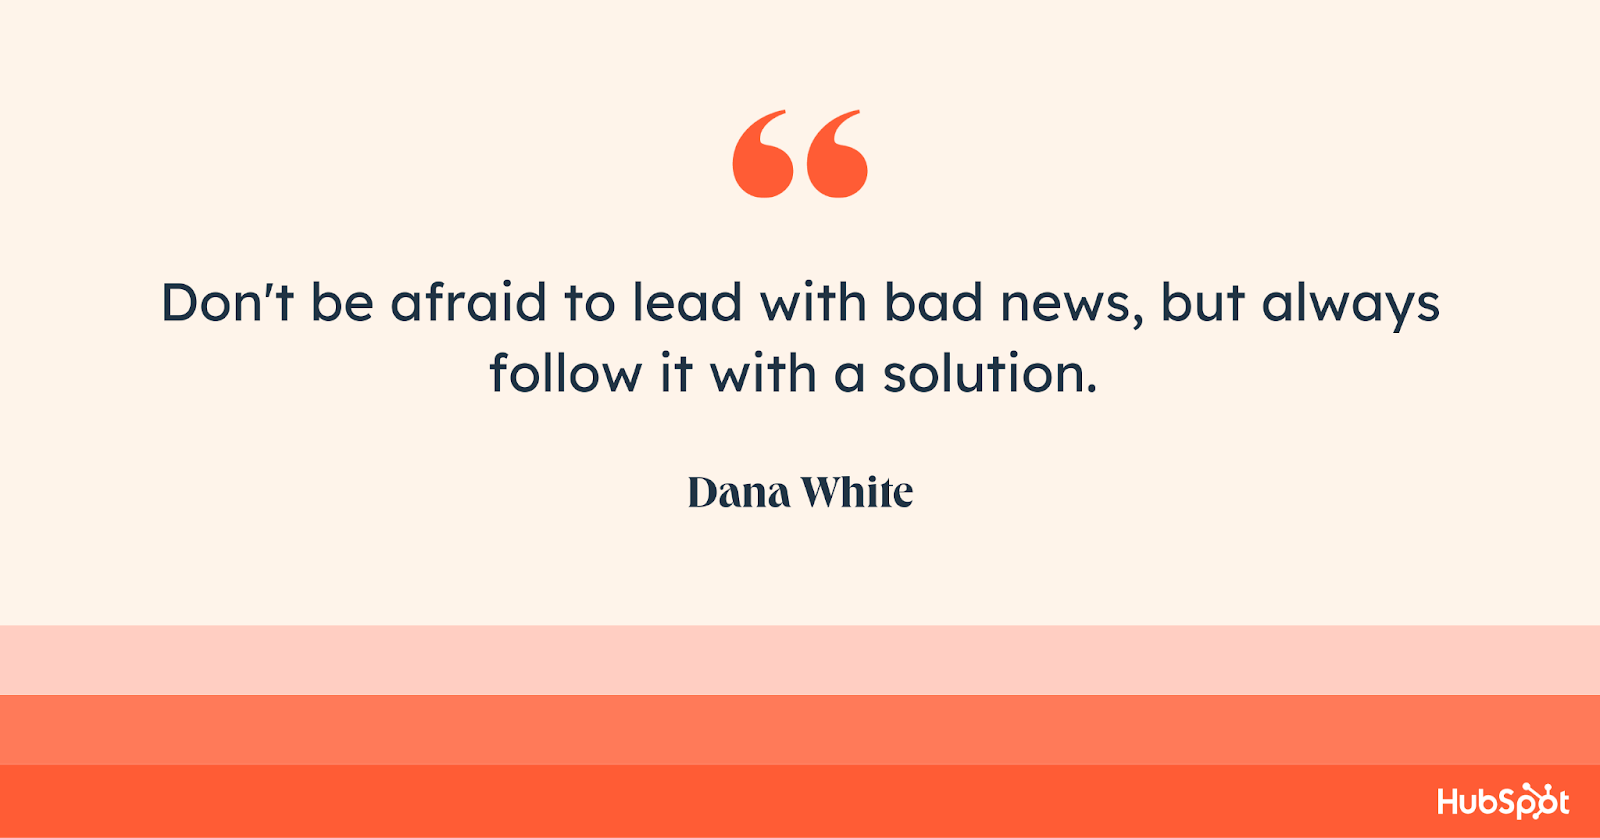 “Don't be afraid to lead with bad news, but always follow it with a solution,” Dana White. 